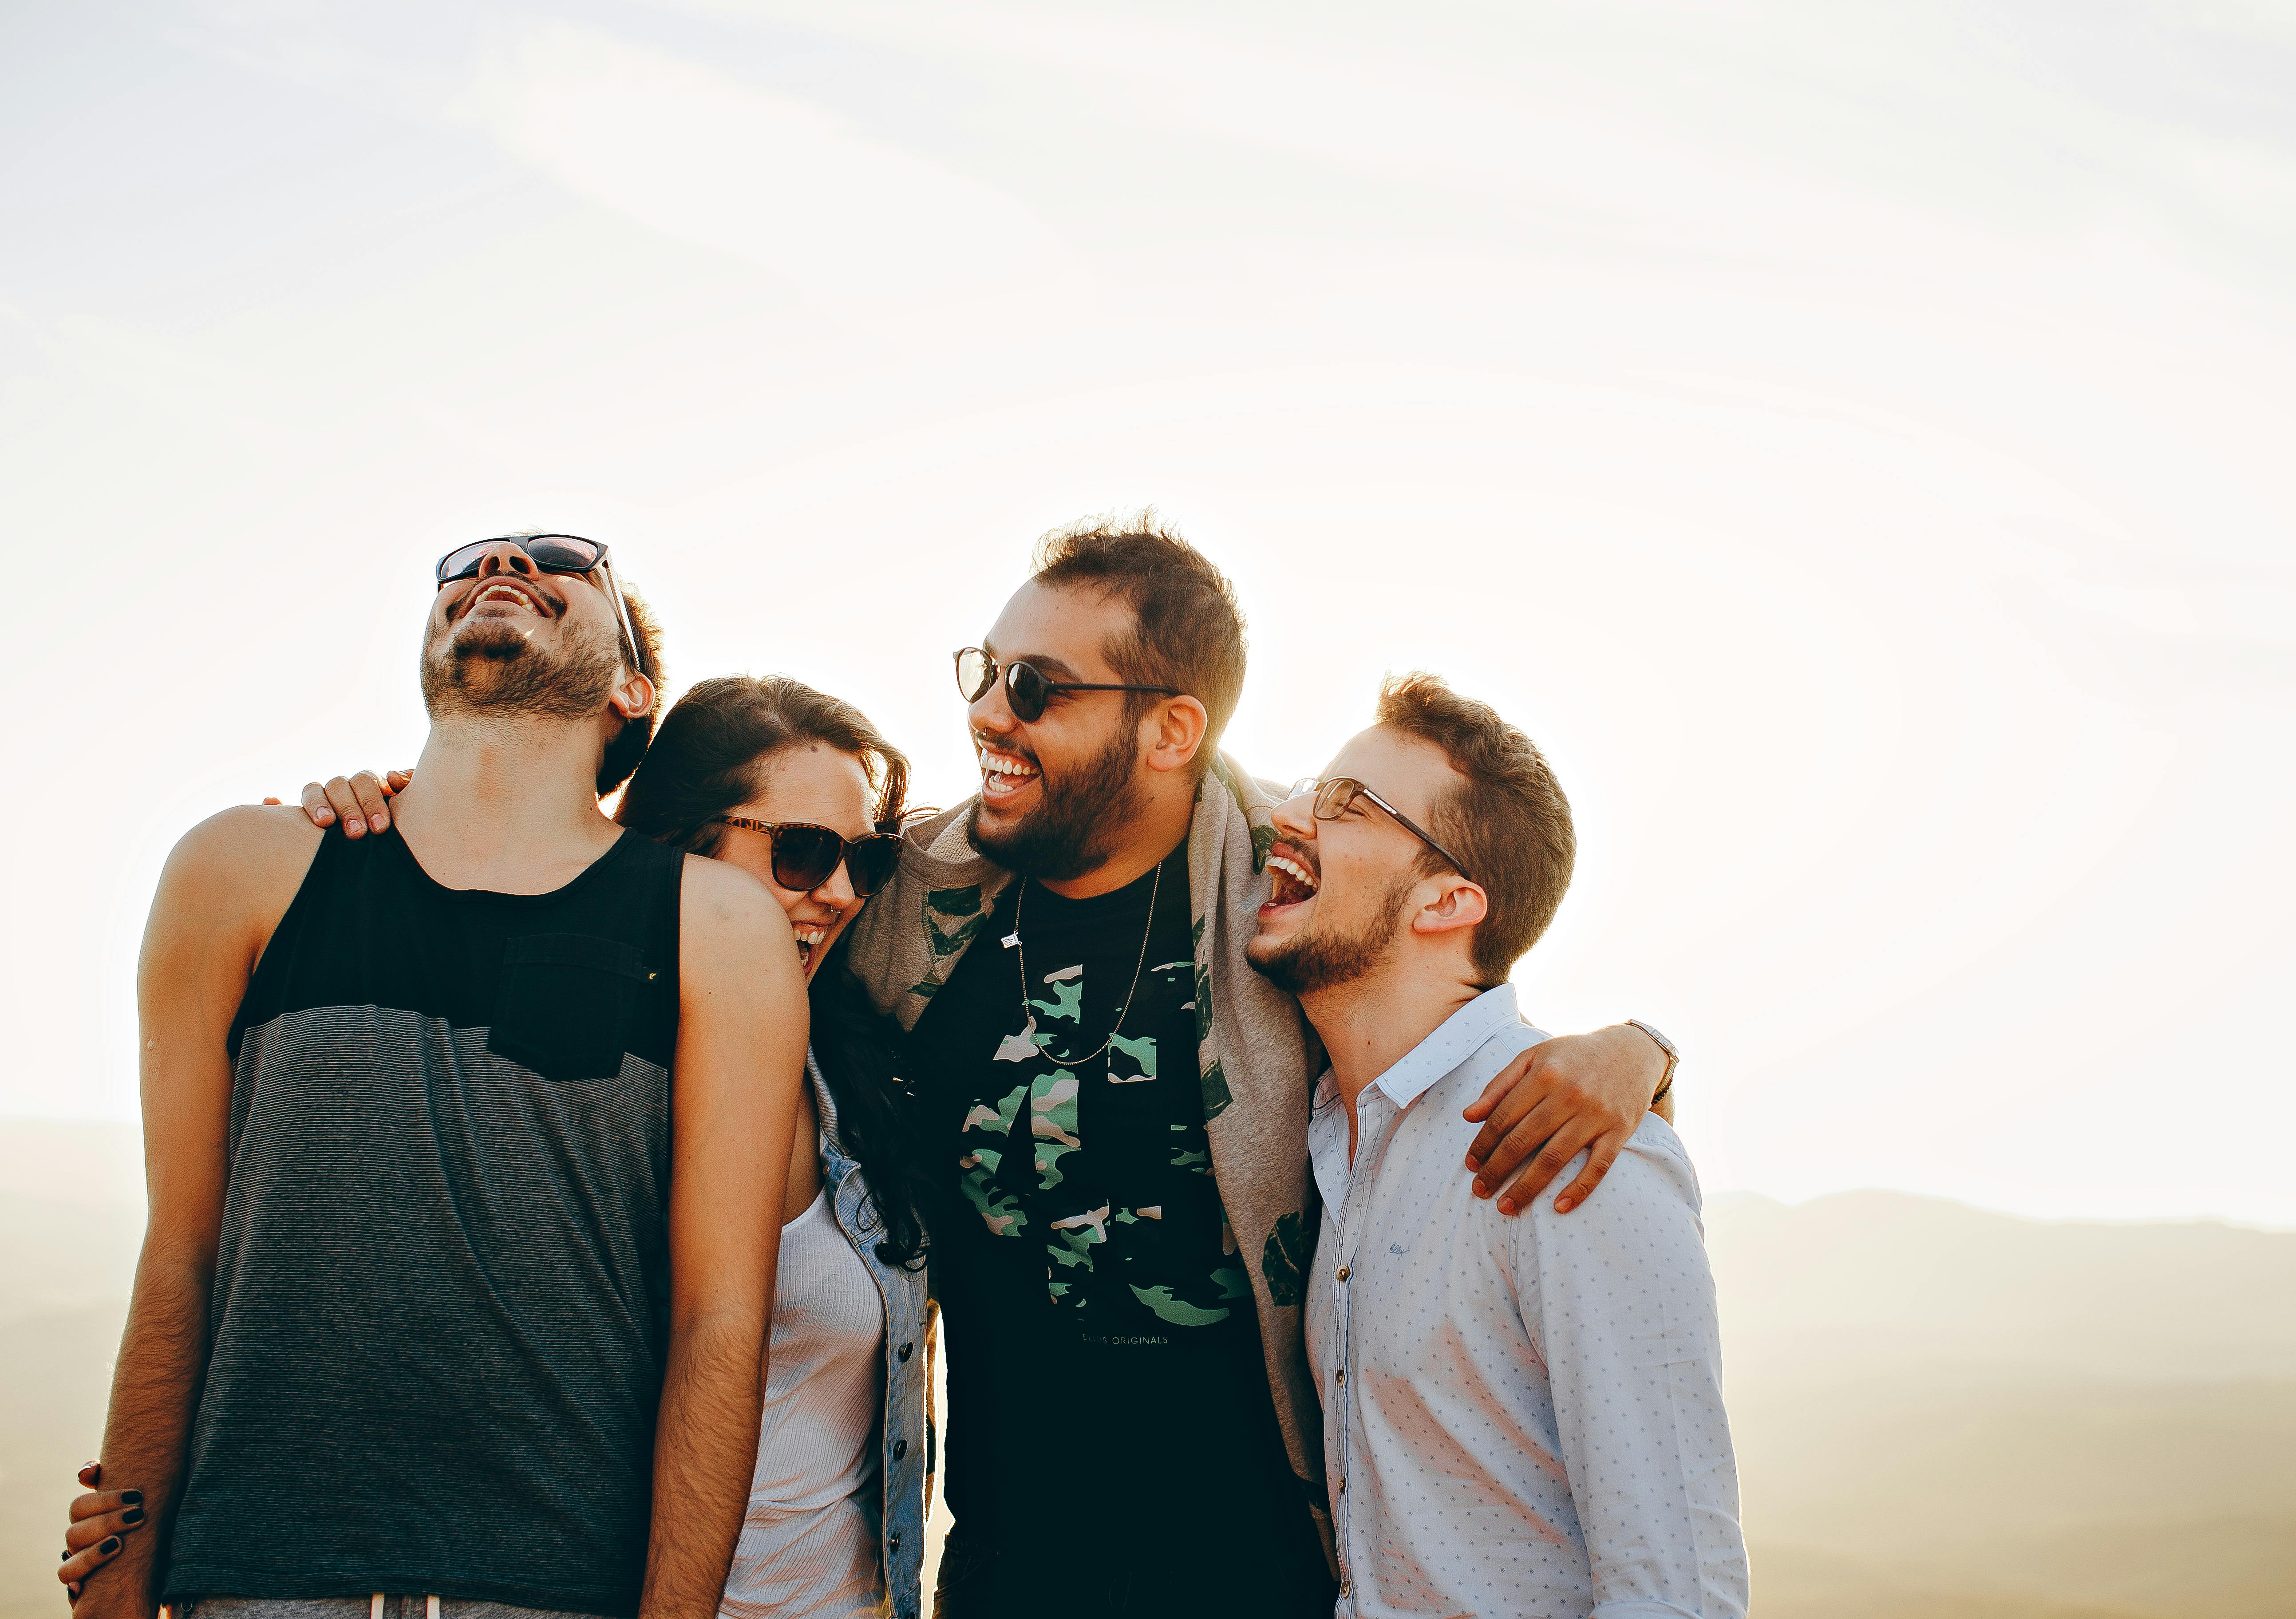 A group of friends laughing | Source: Pexels